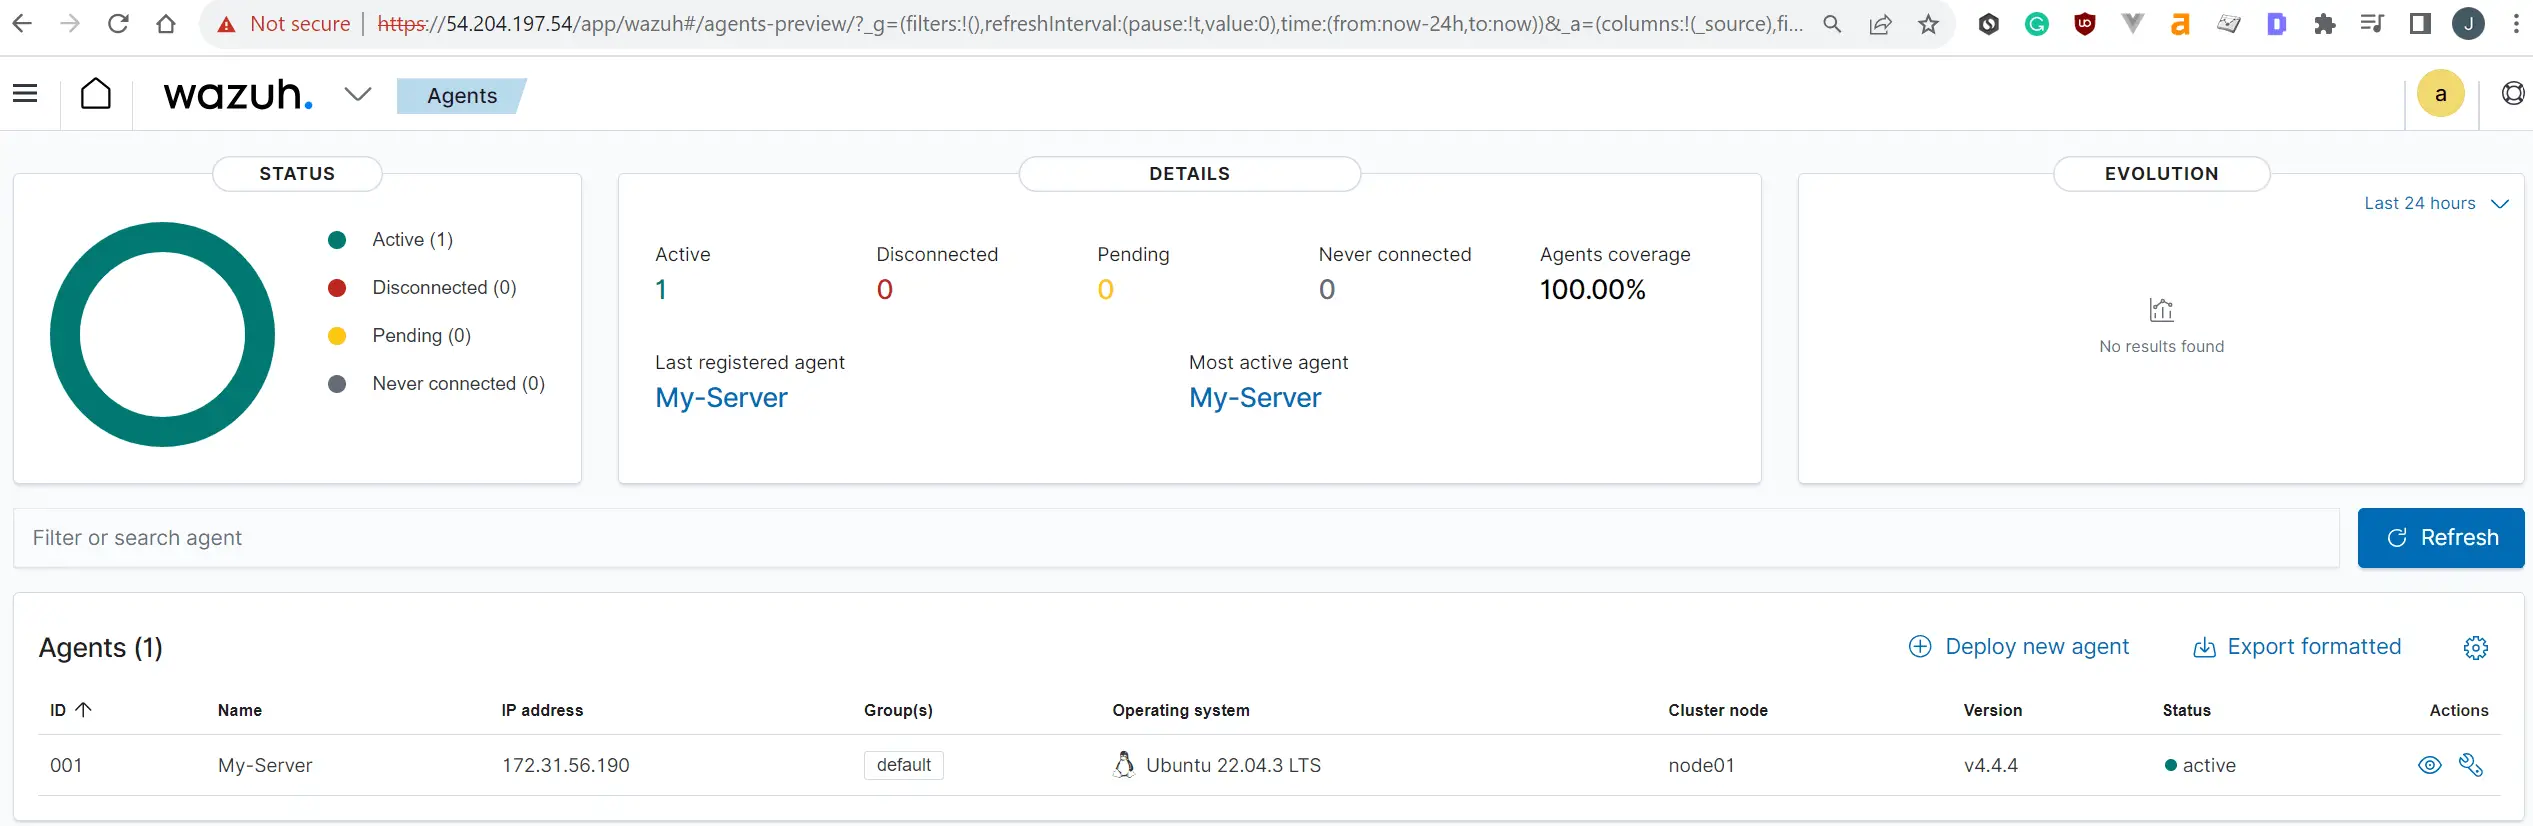 Installing and Deploying Wazuh with Docker Compose Containers